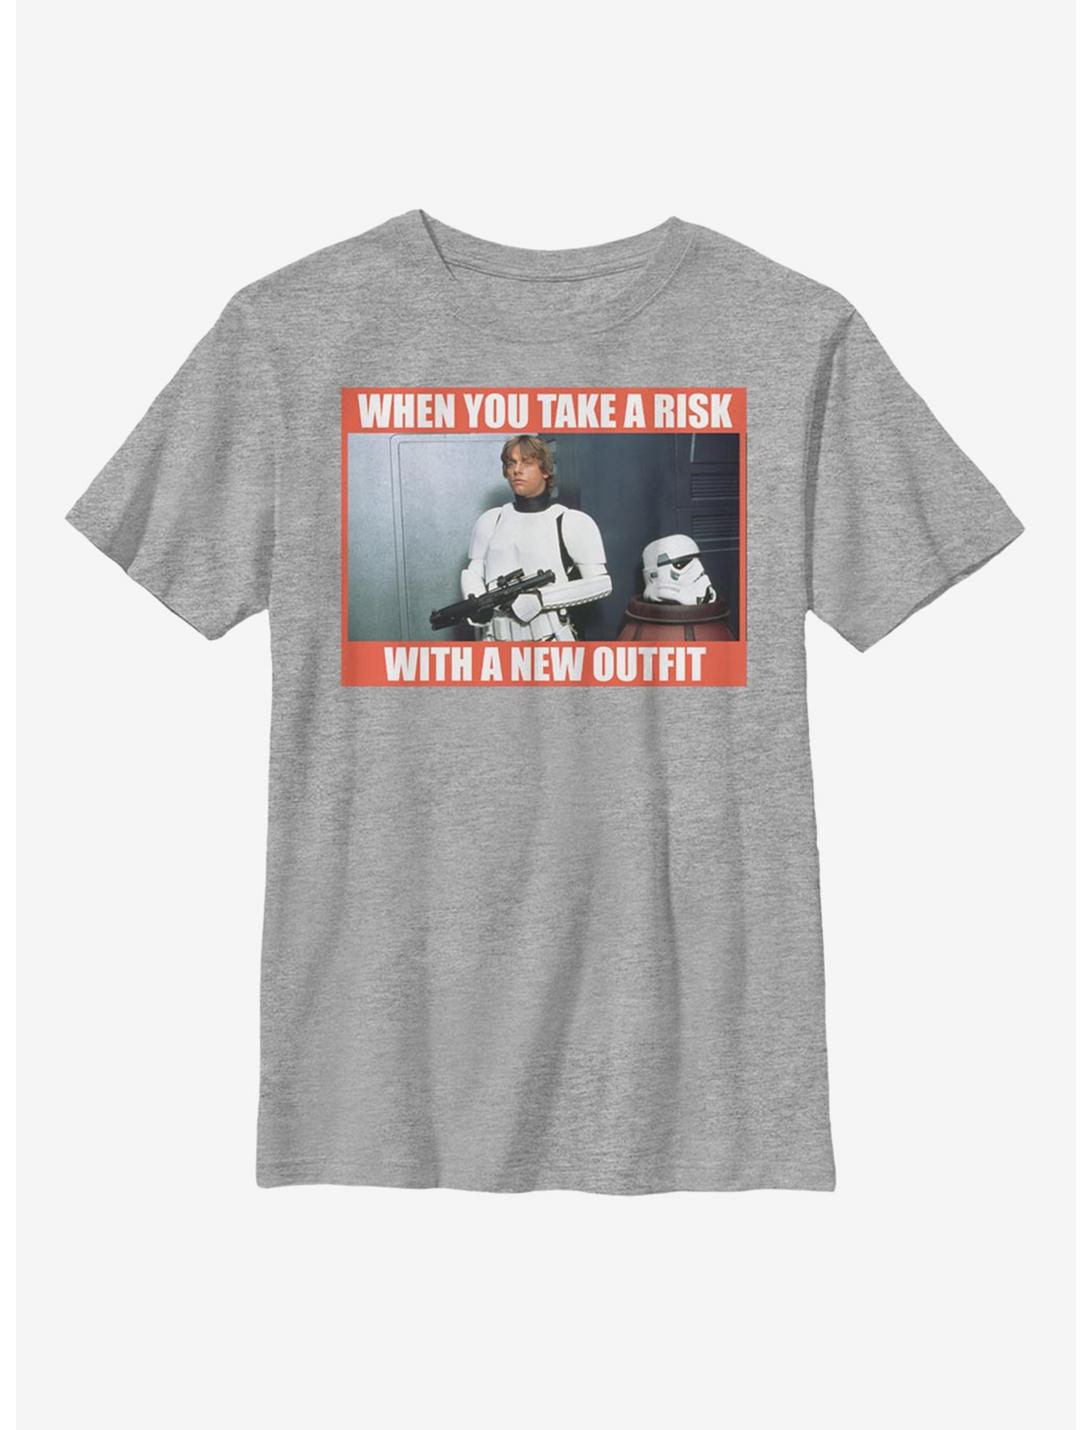 Star Wars Risky New Outfit Youth T-Shirt, ATH HTR, hi-res